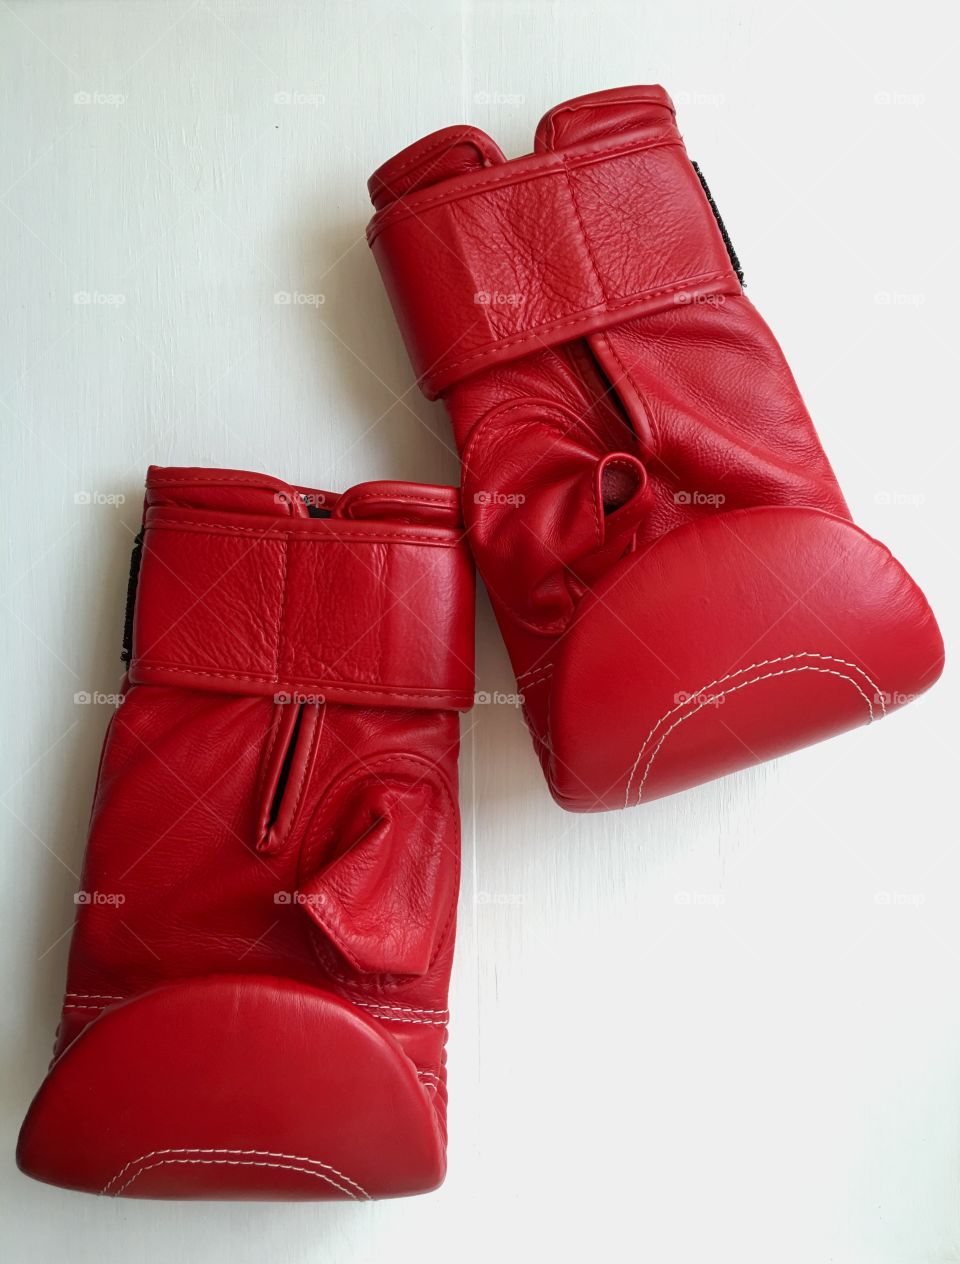 sports equipment, a pair of red leather gloves on a white wooden background, top view